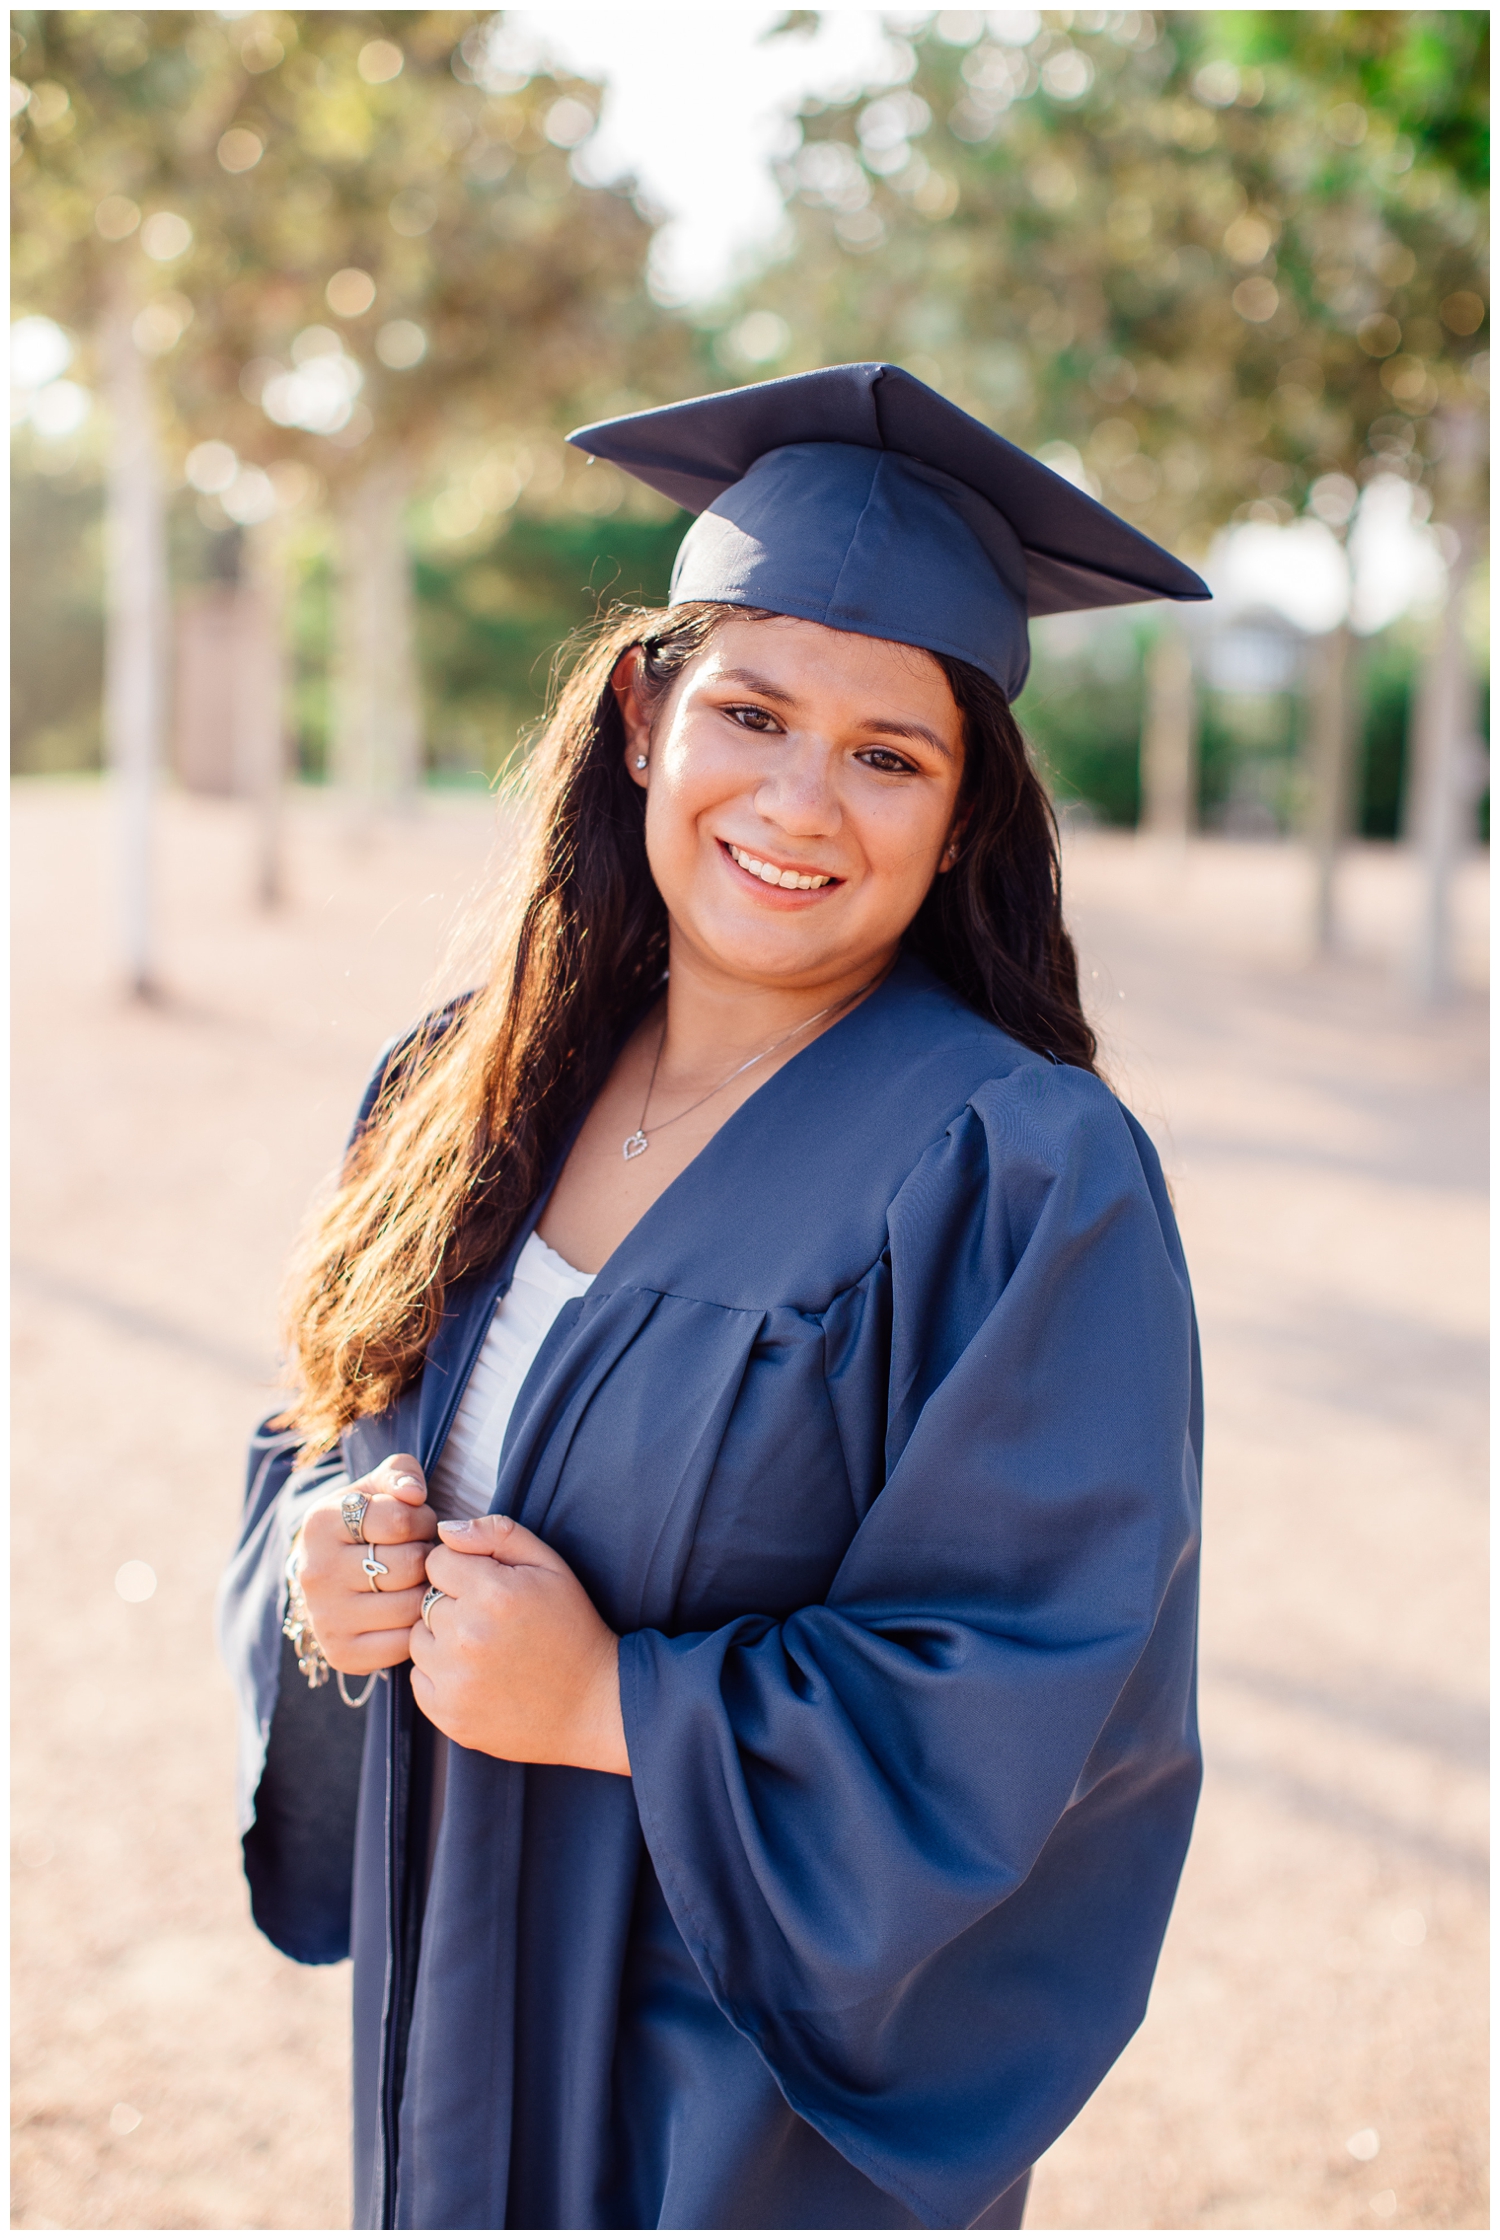 high school senior girl in cap and graduation gown smiling at camera